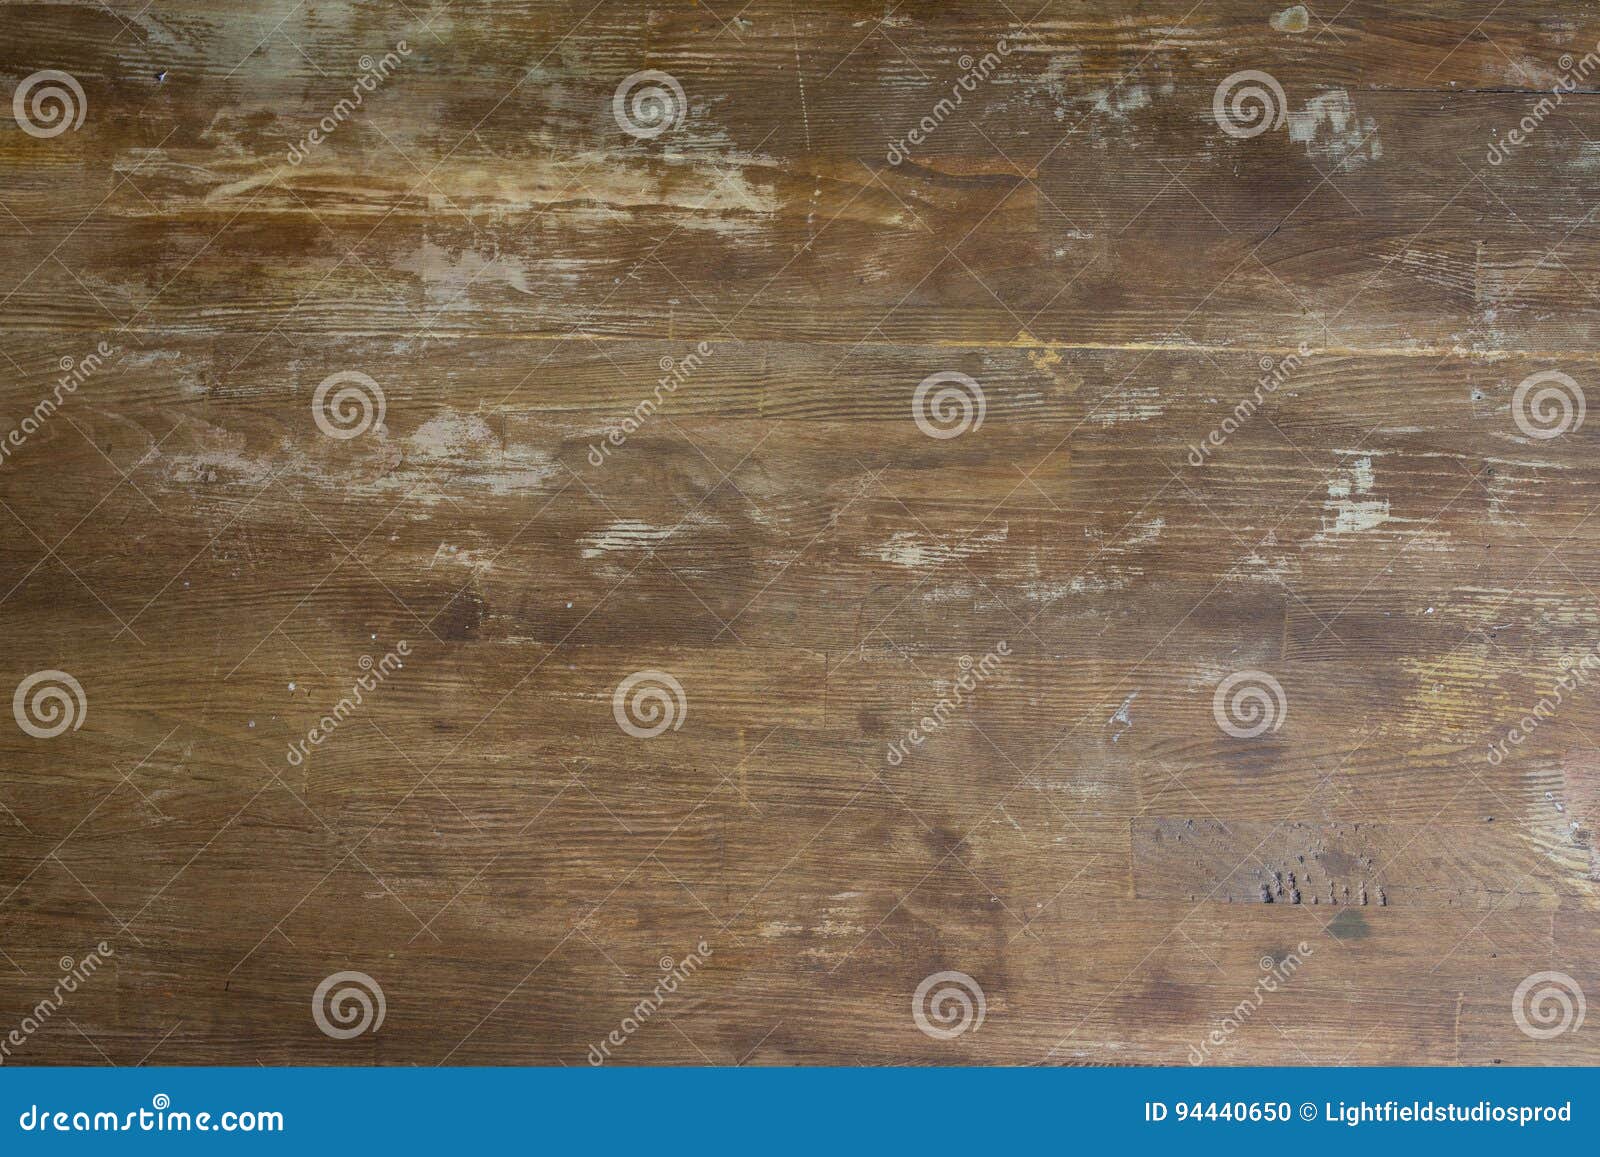 old shabby wooden tabletop background